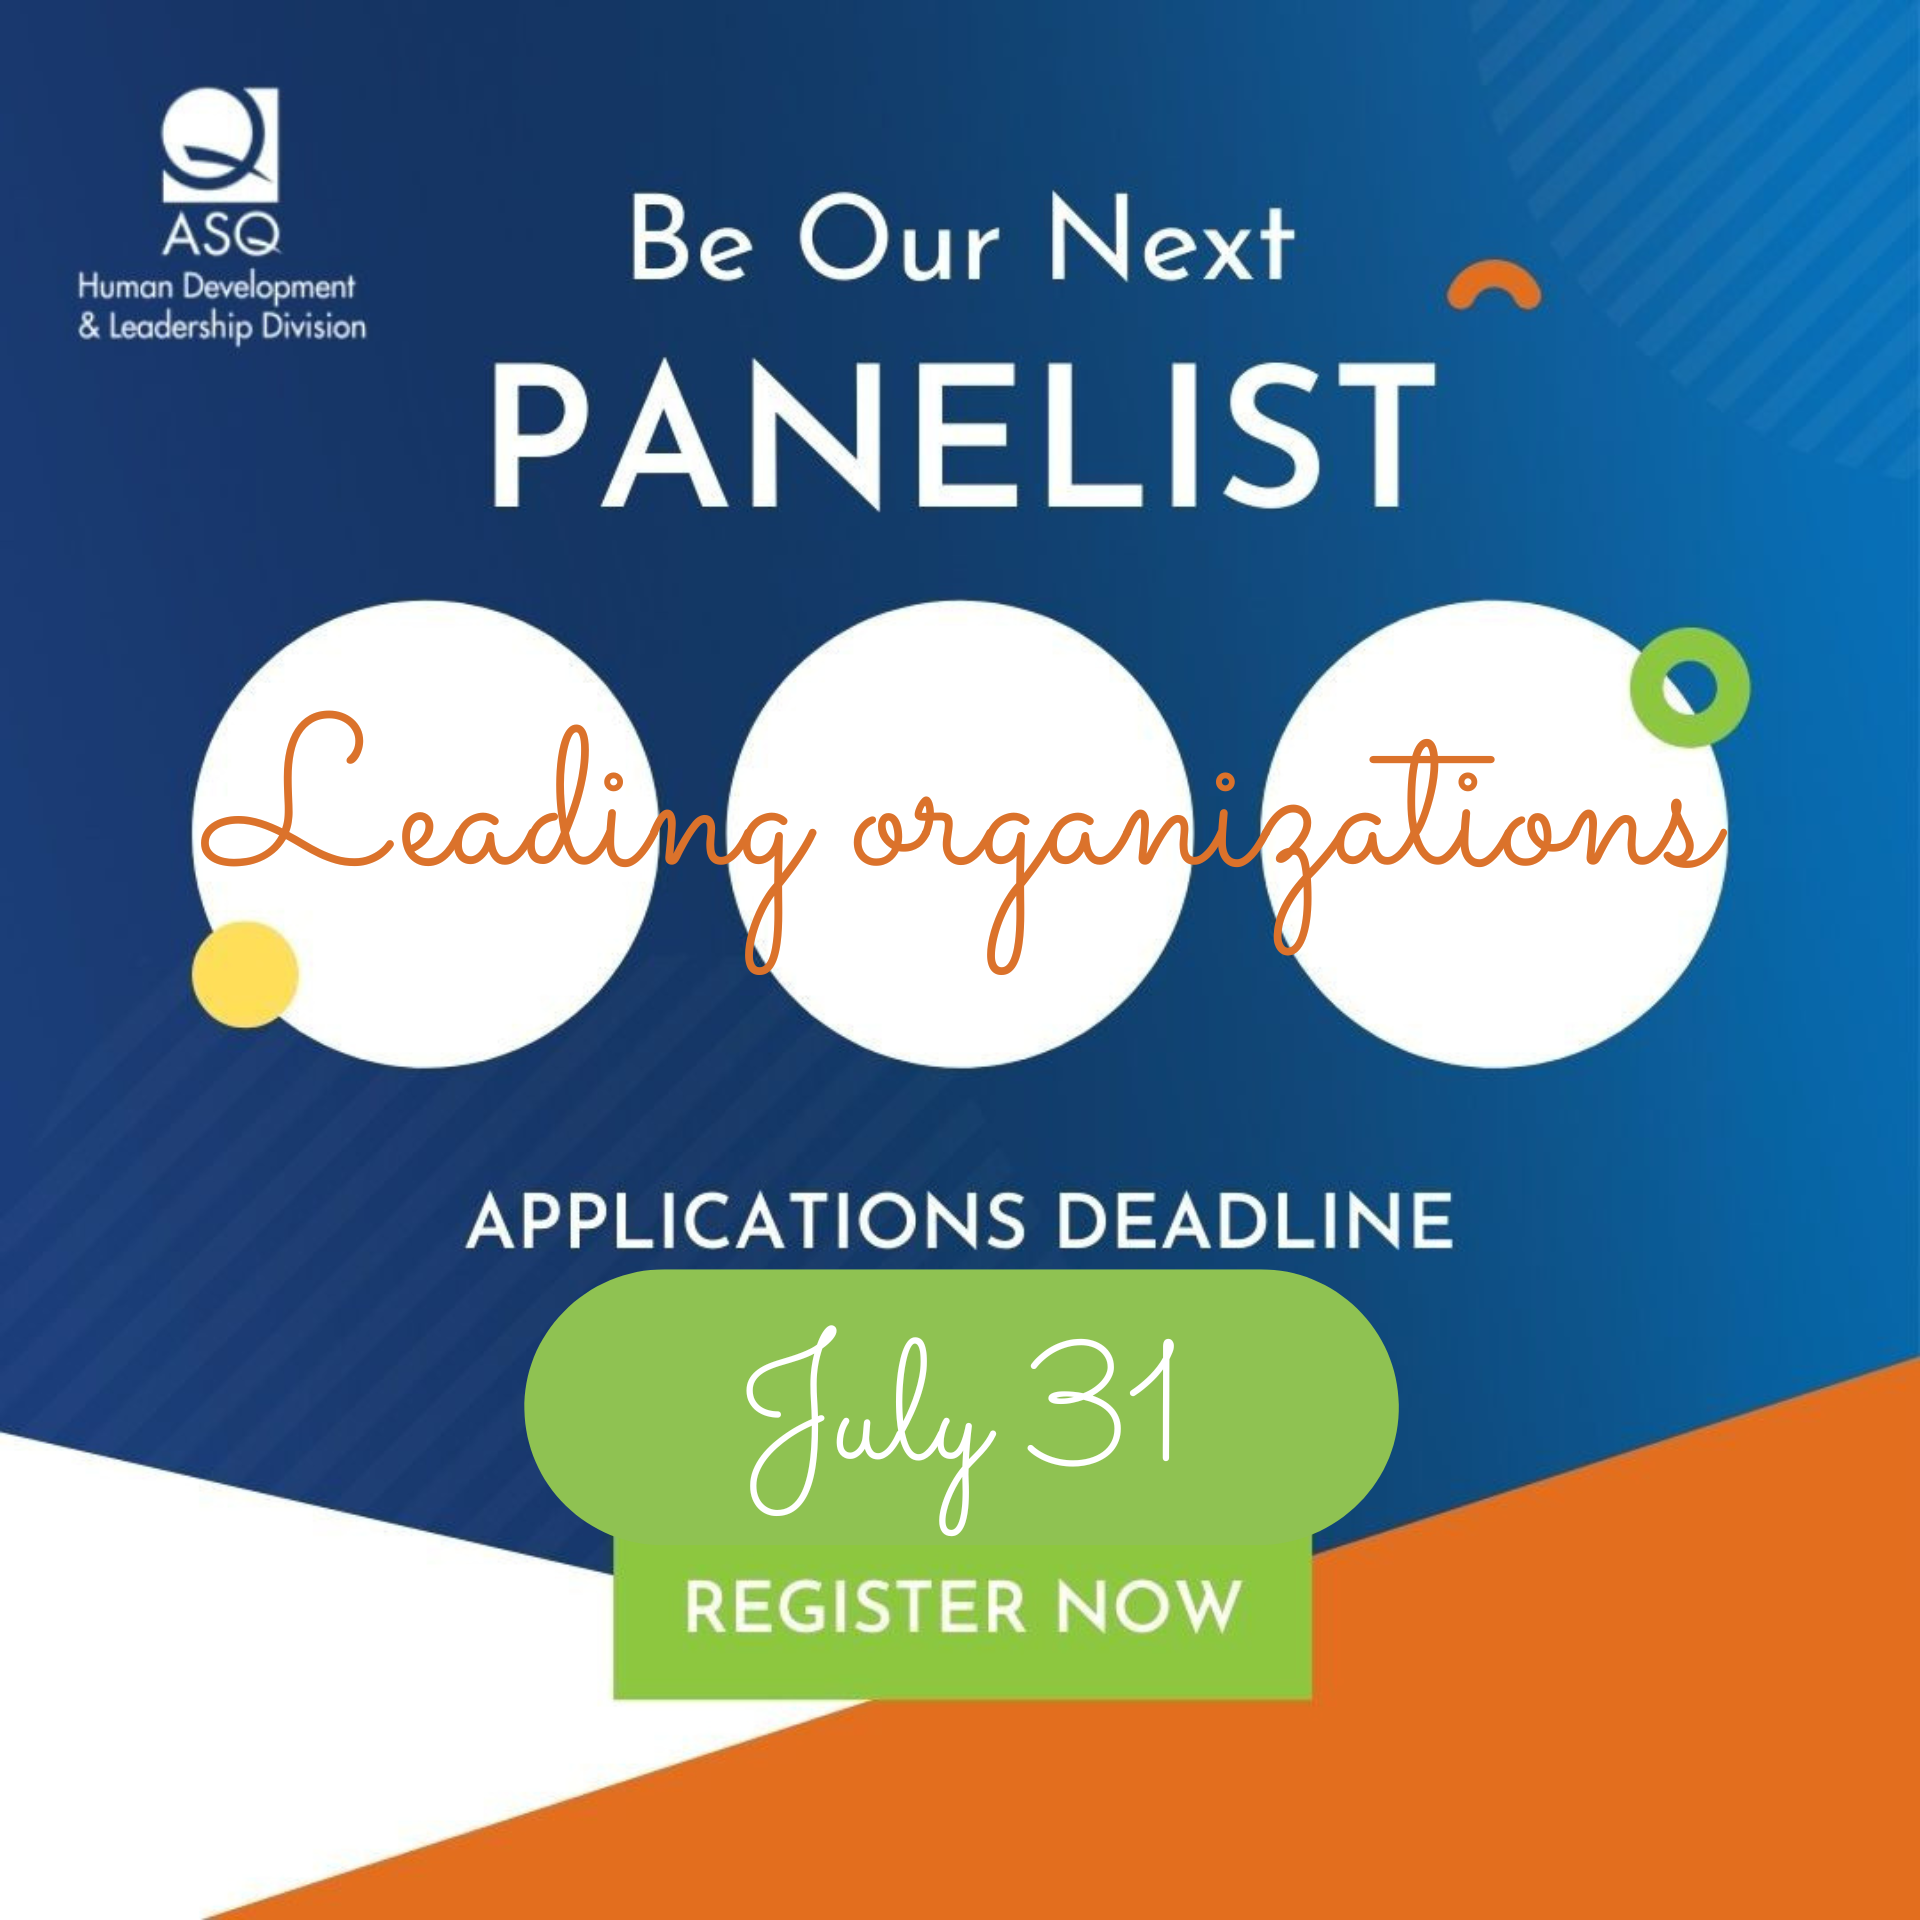 Accepting Panelist Applications For Our Next HD&L Panel Discussion On "Leading Organizations" - Due July 31st, 2022 3175